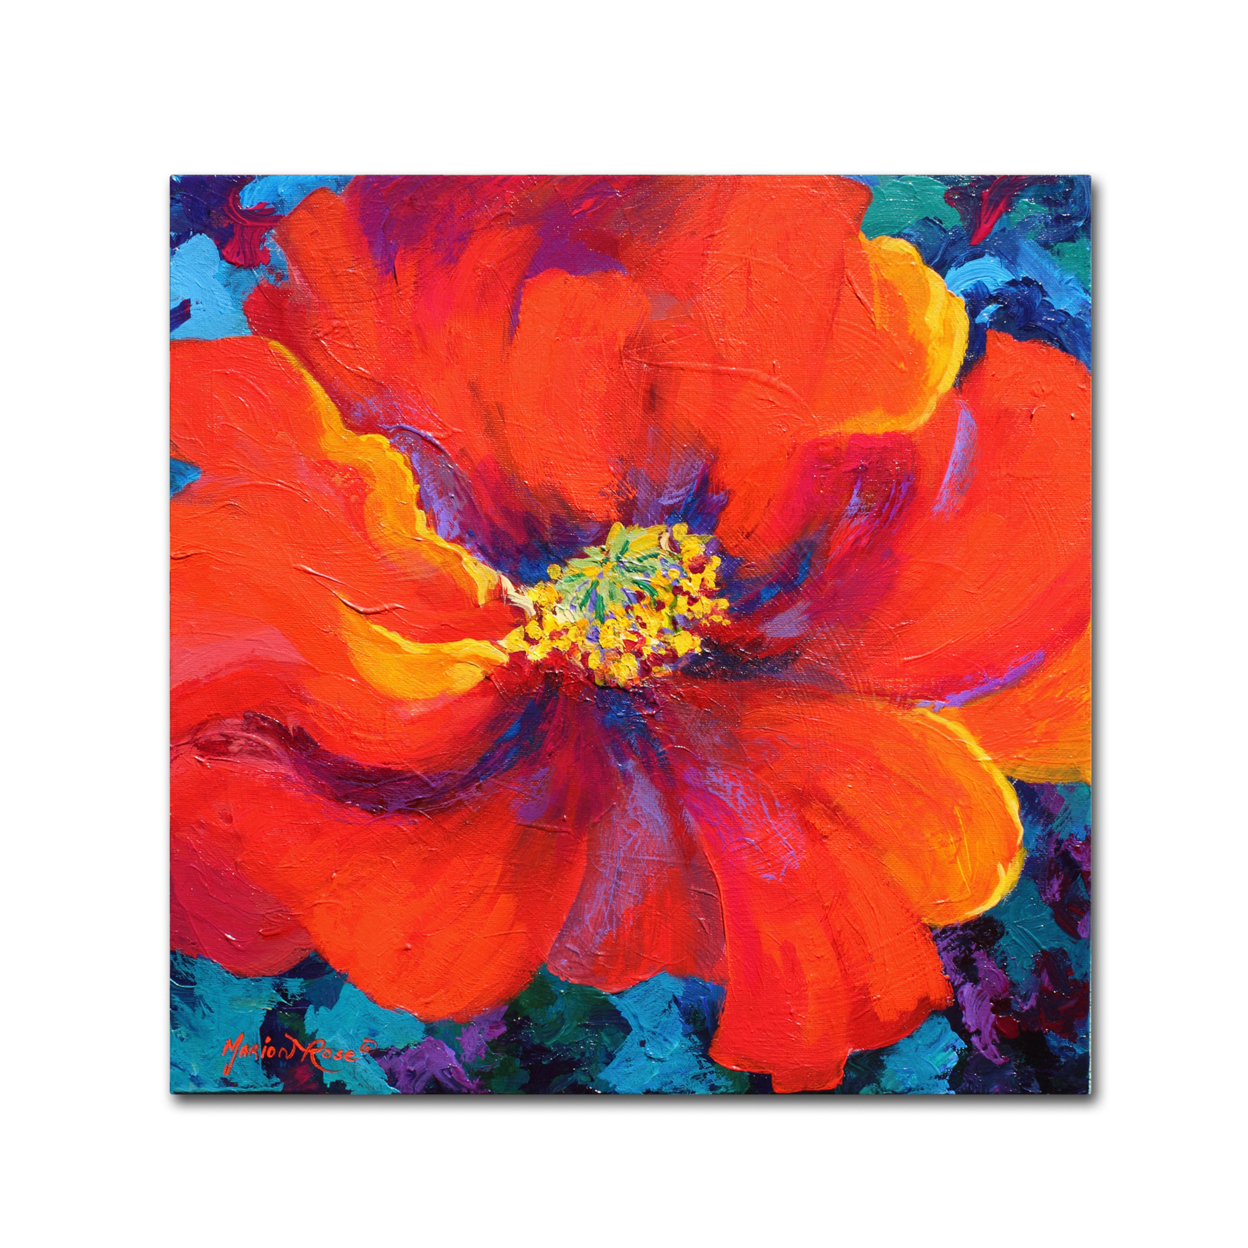 Marion Rose 'Passion Poppy' Ready To Hang Canvas Art 35 X 35 Inches Made In USA